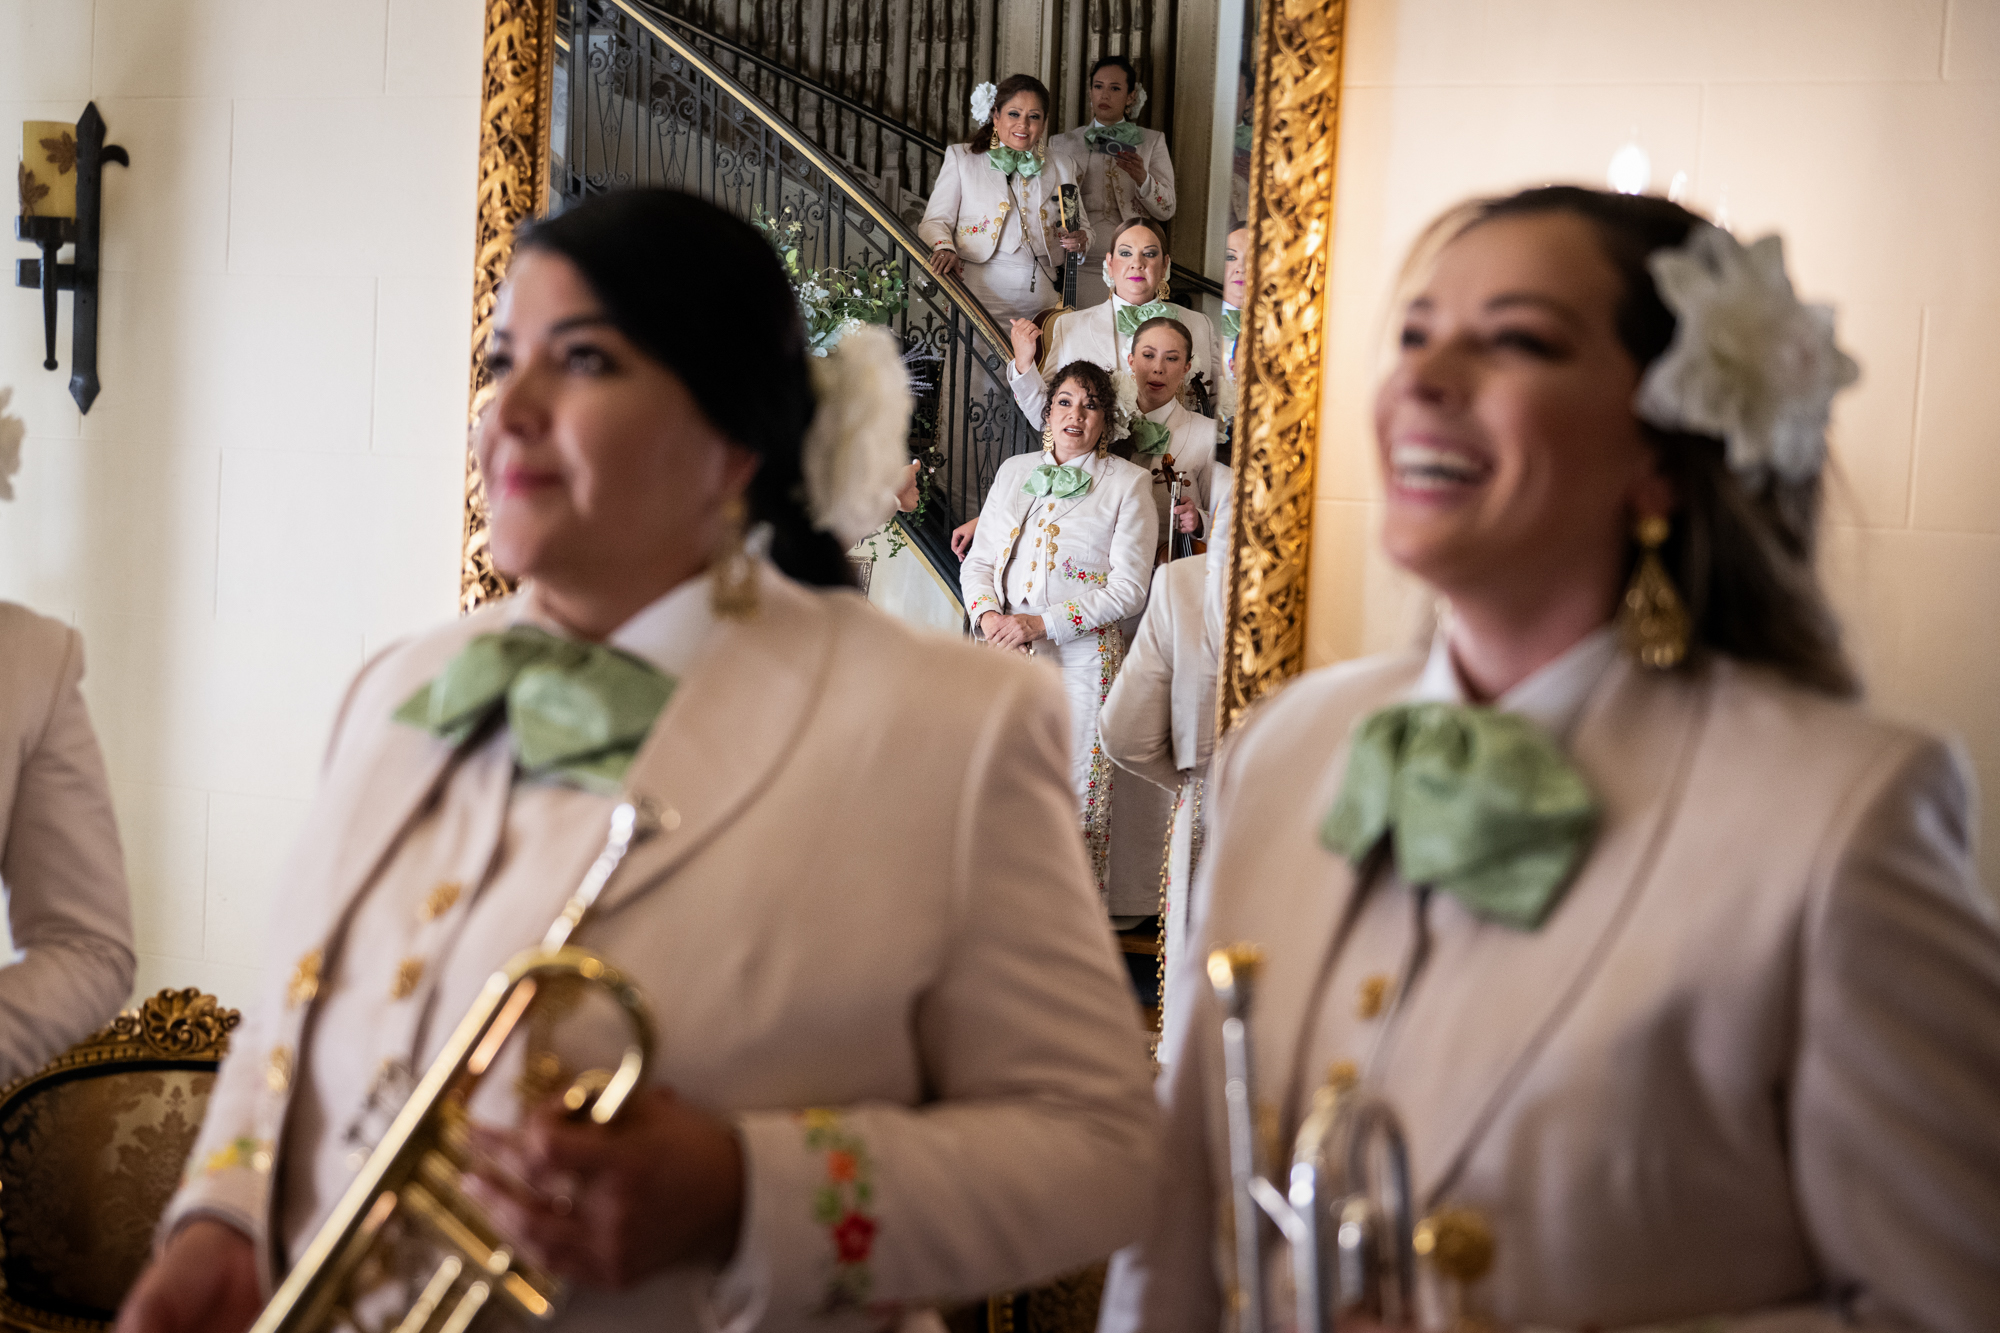 Women wearing ornate white outfits and holding instruments in an indoor setting.